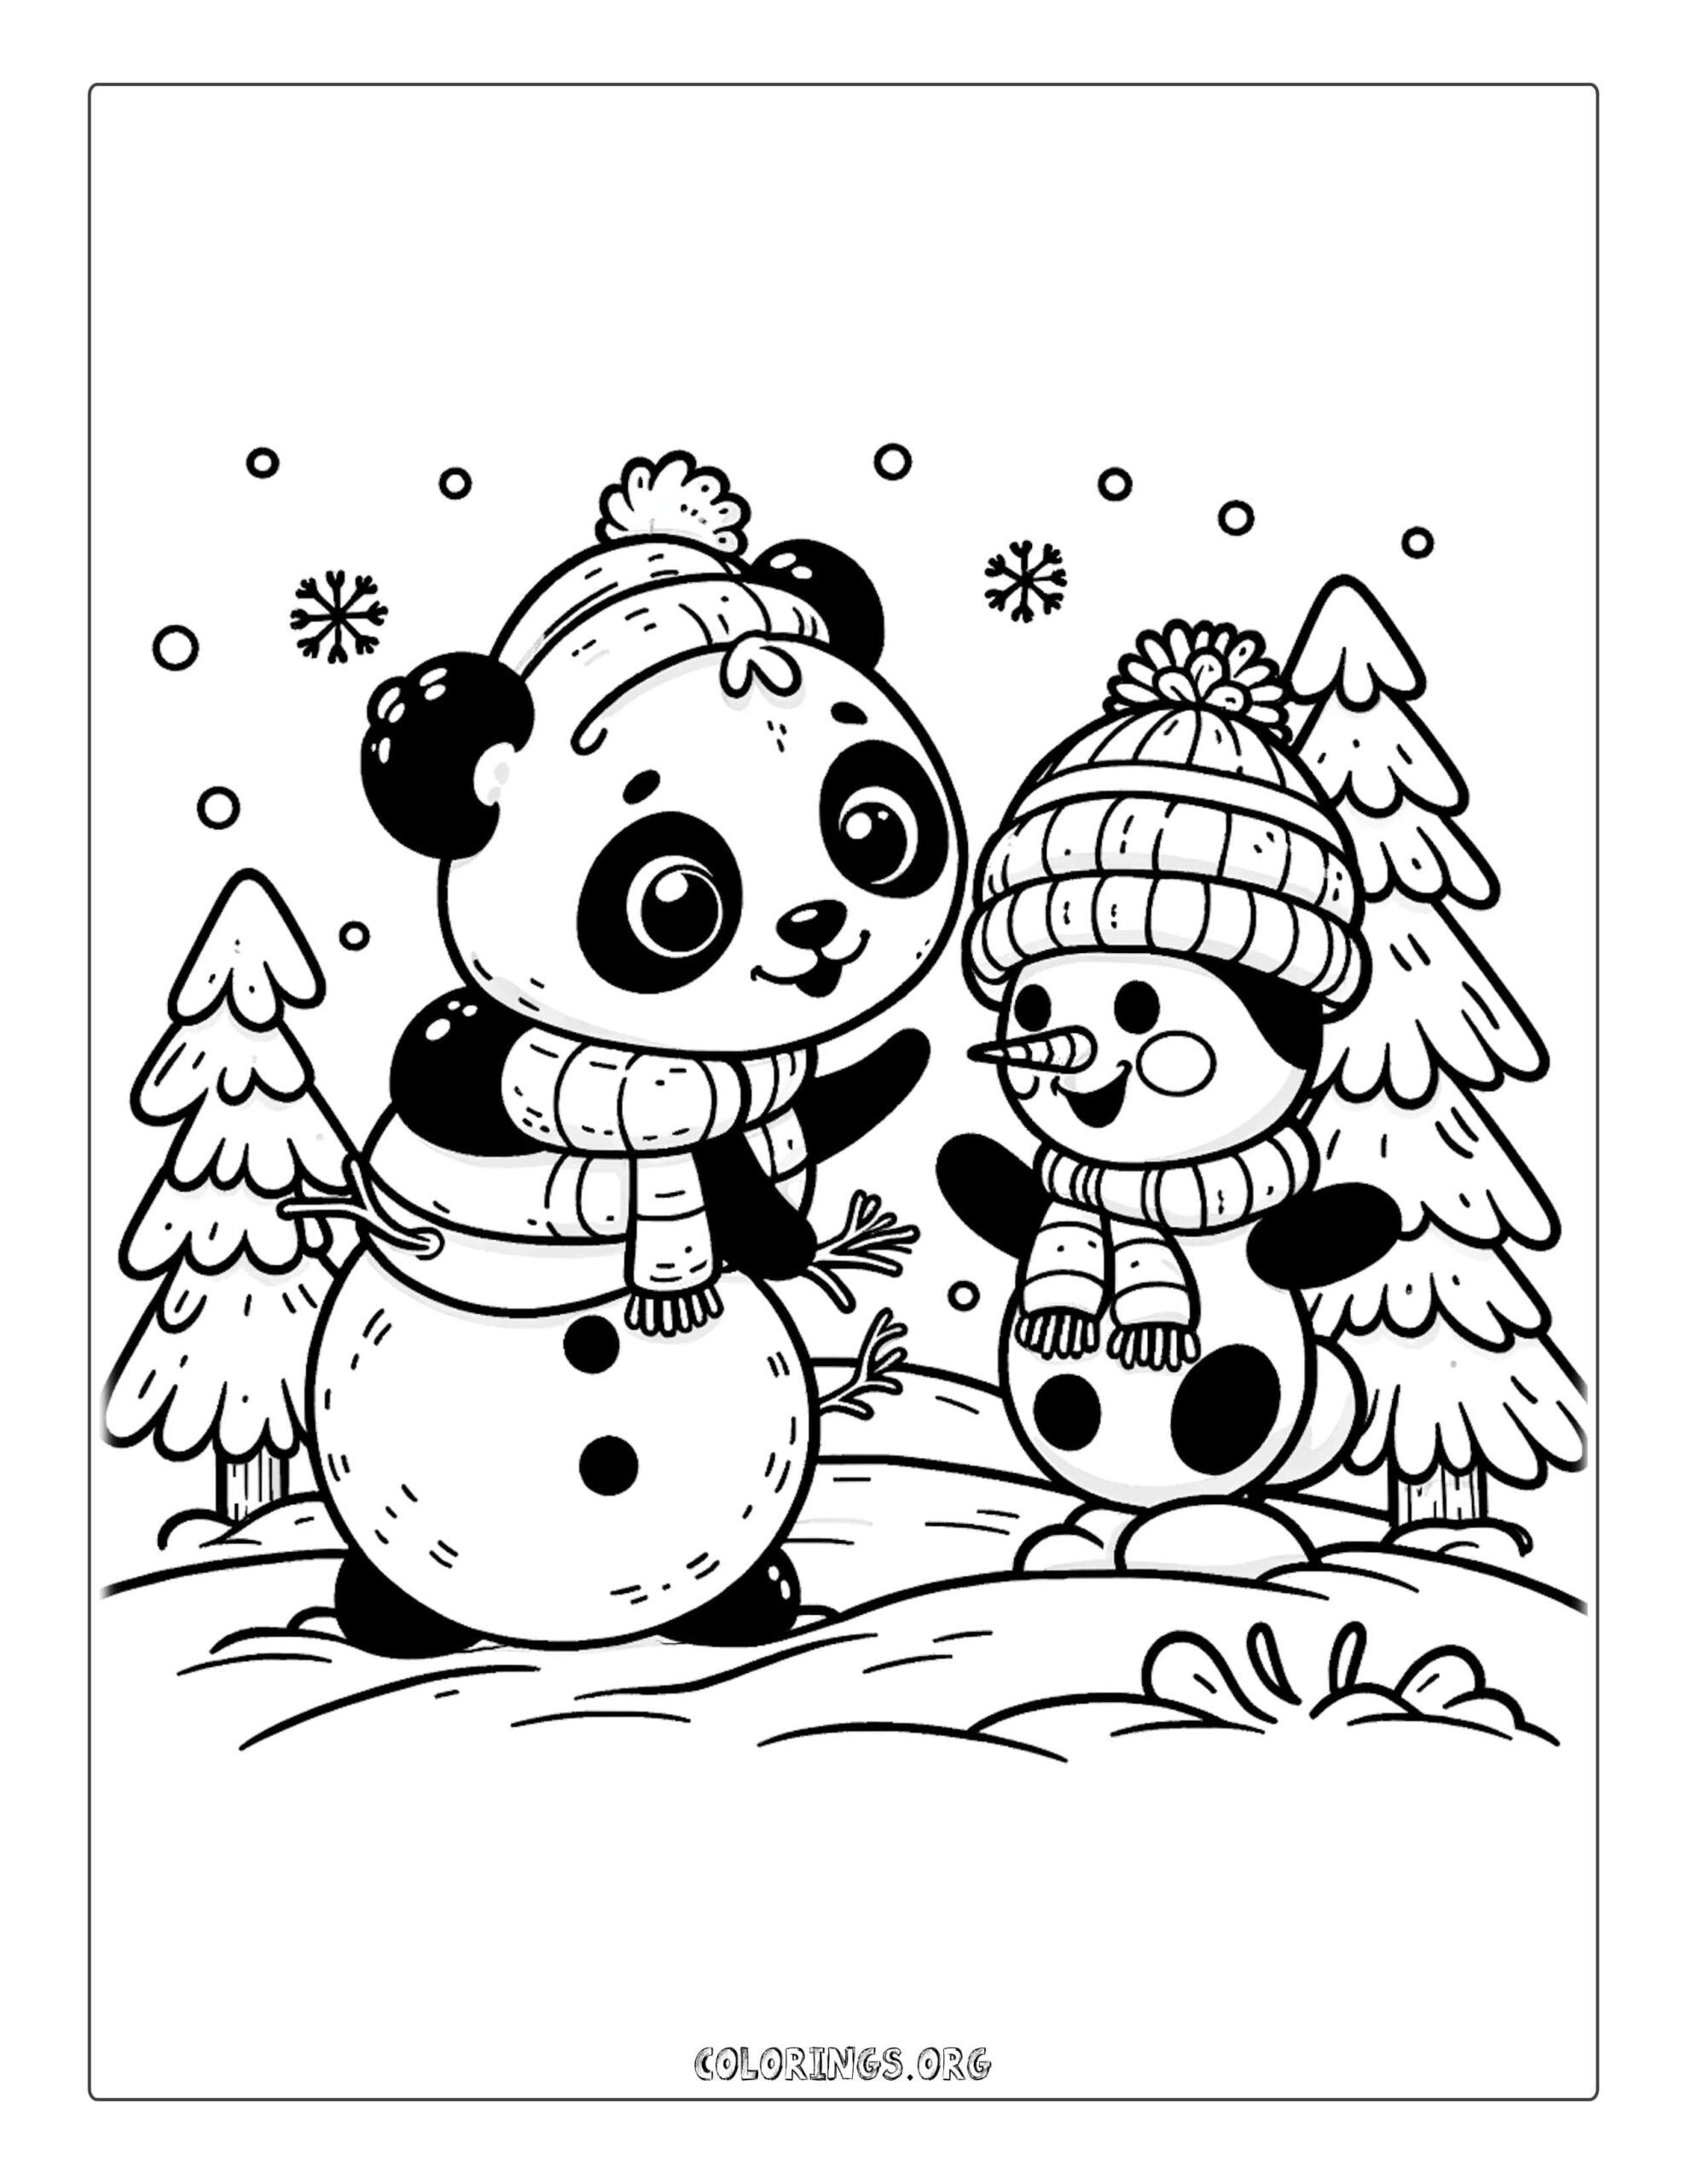 Panda Cub with Snowman Coloring Page